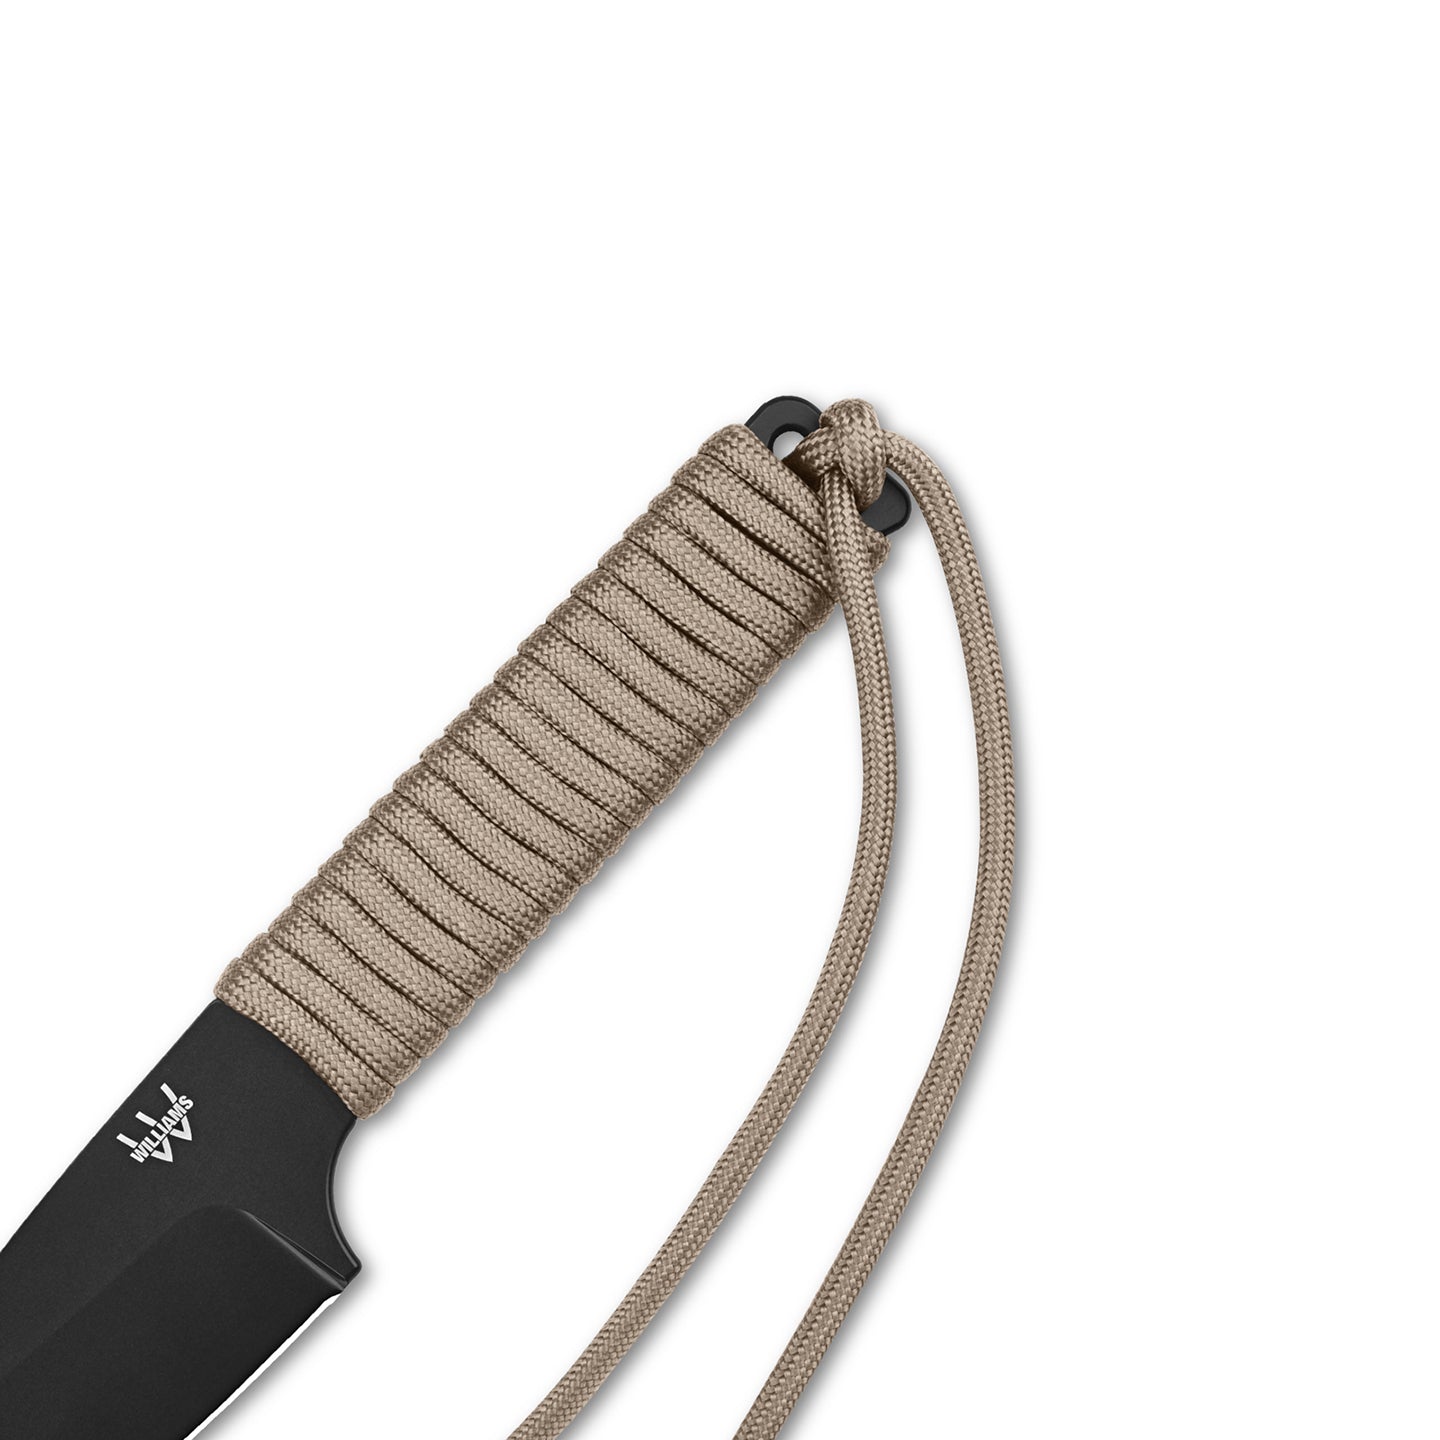 Black Paracord, Knife Handle Cord